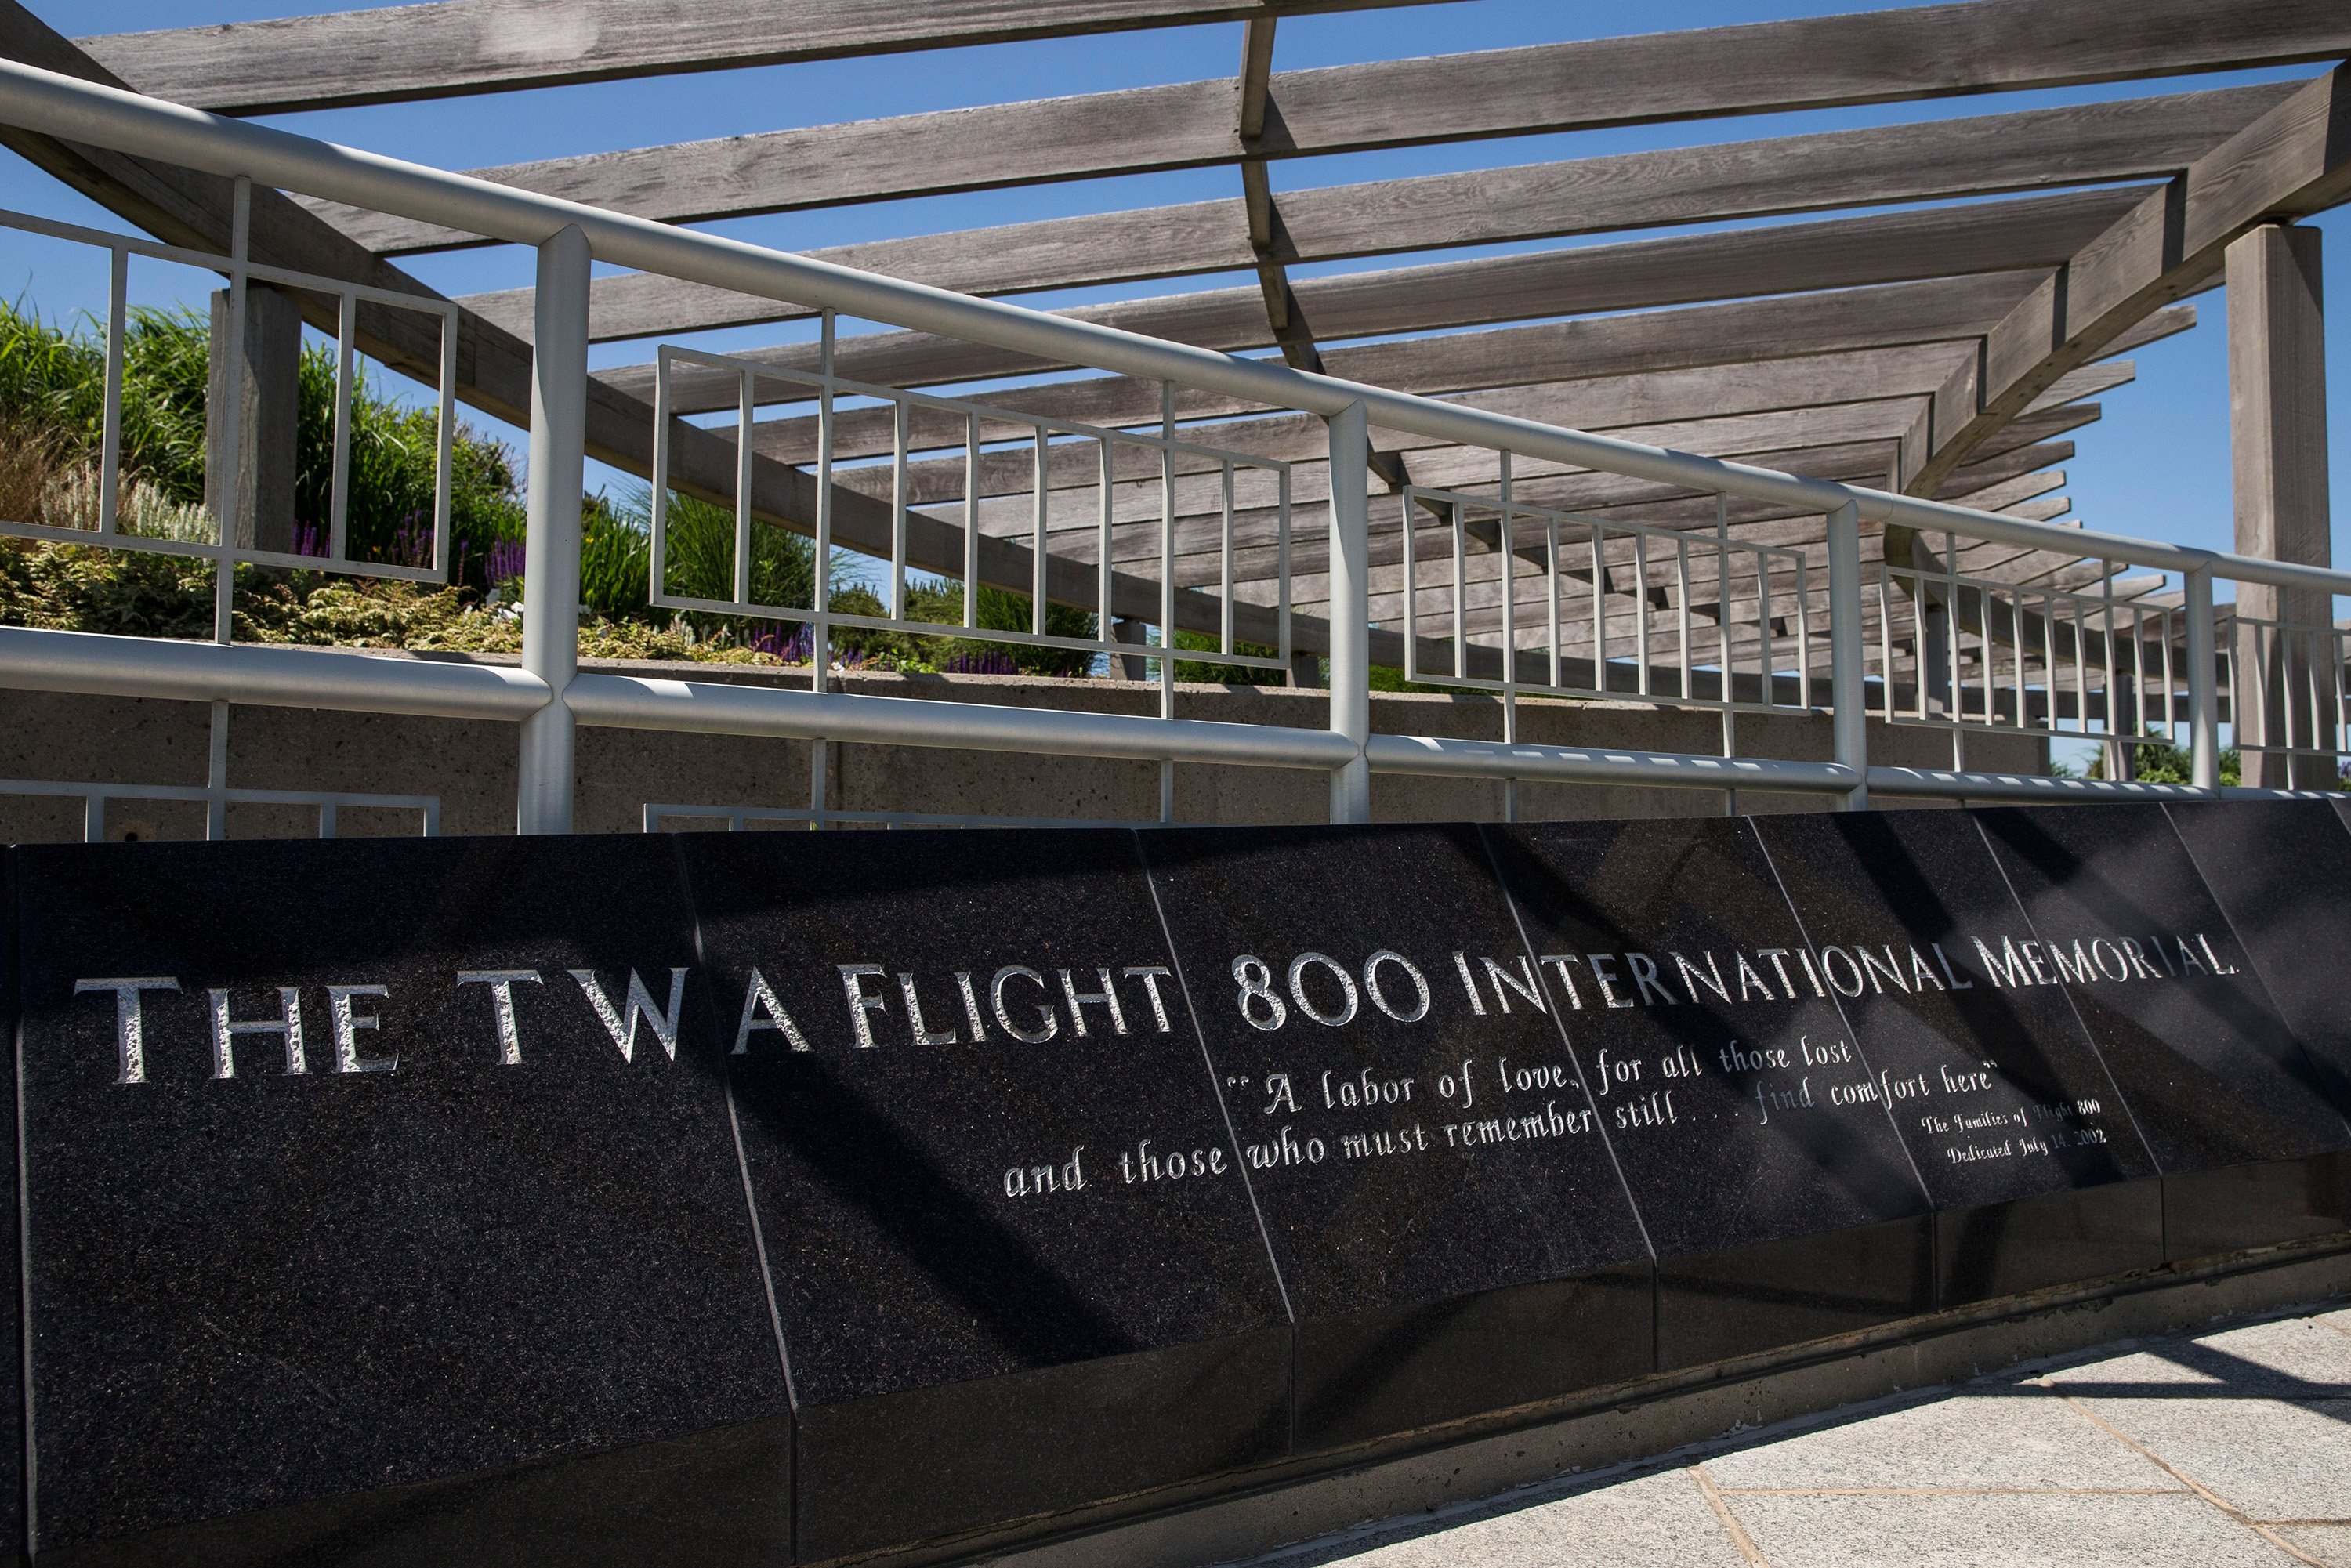 A missile or bomb was first suspected in TWA Flight 800 tragedy – New York  Daily News